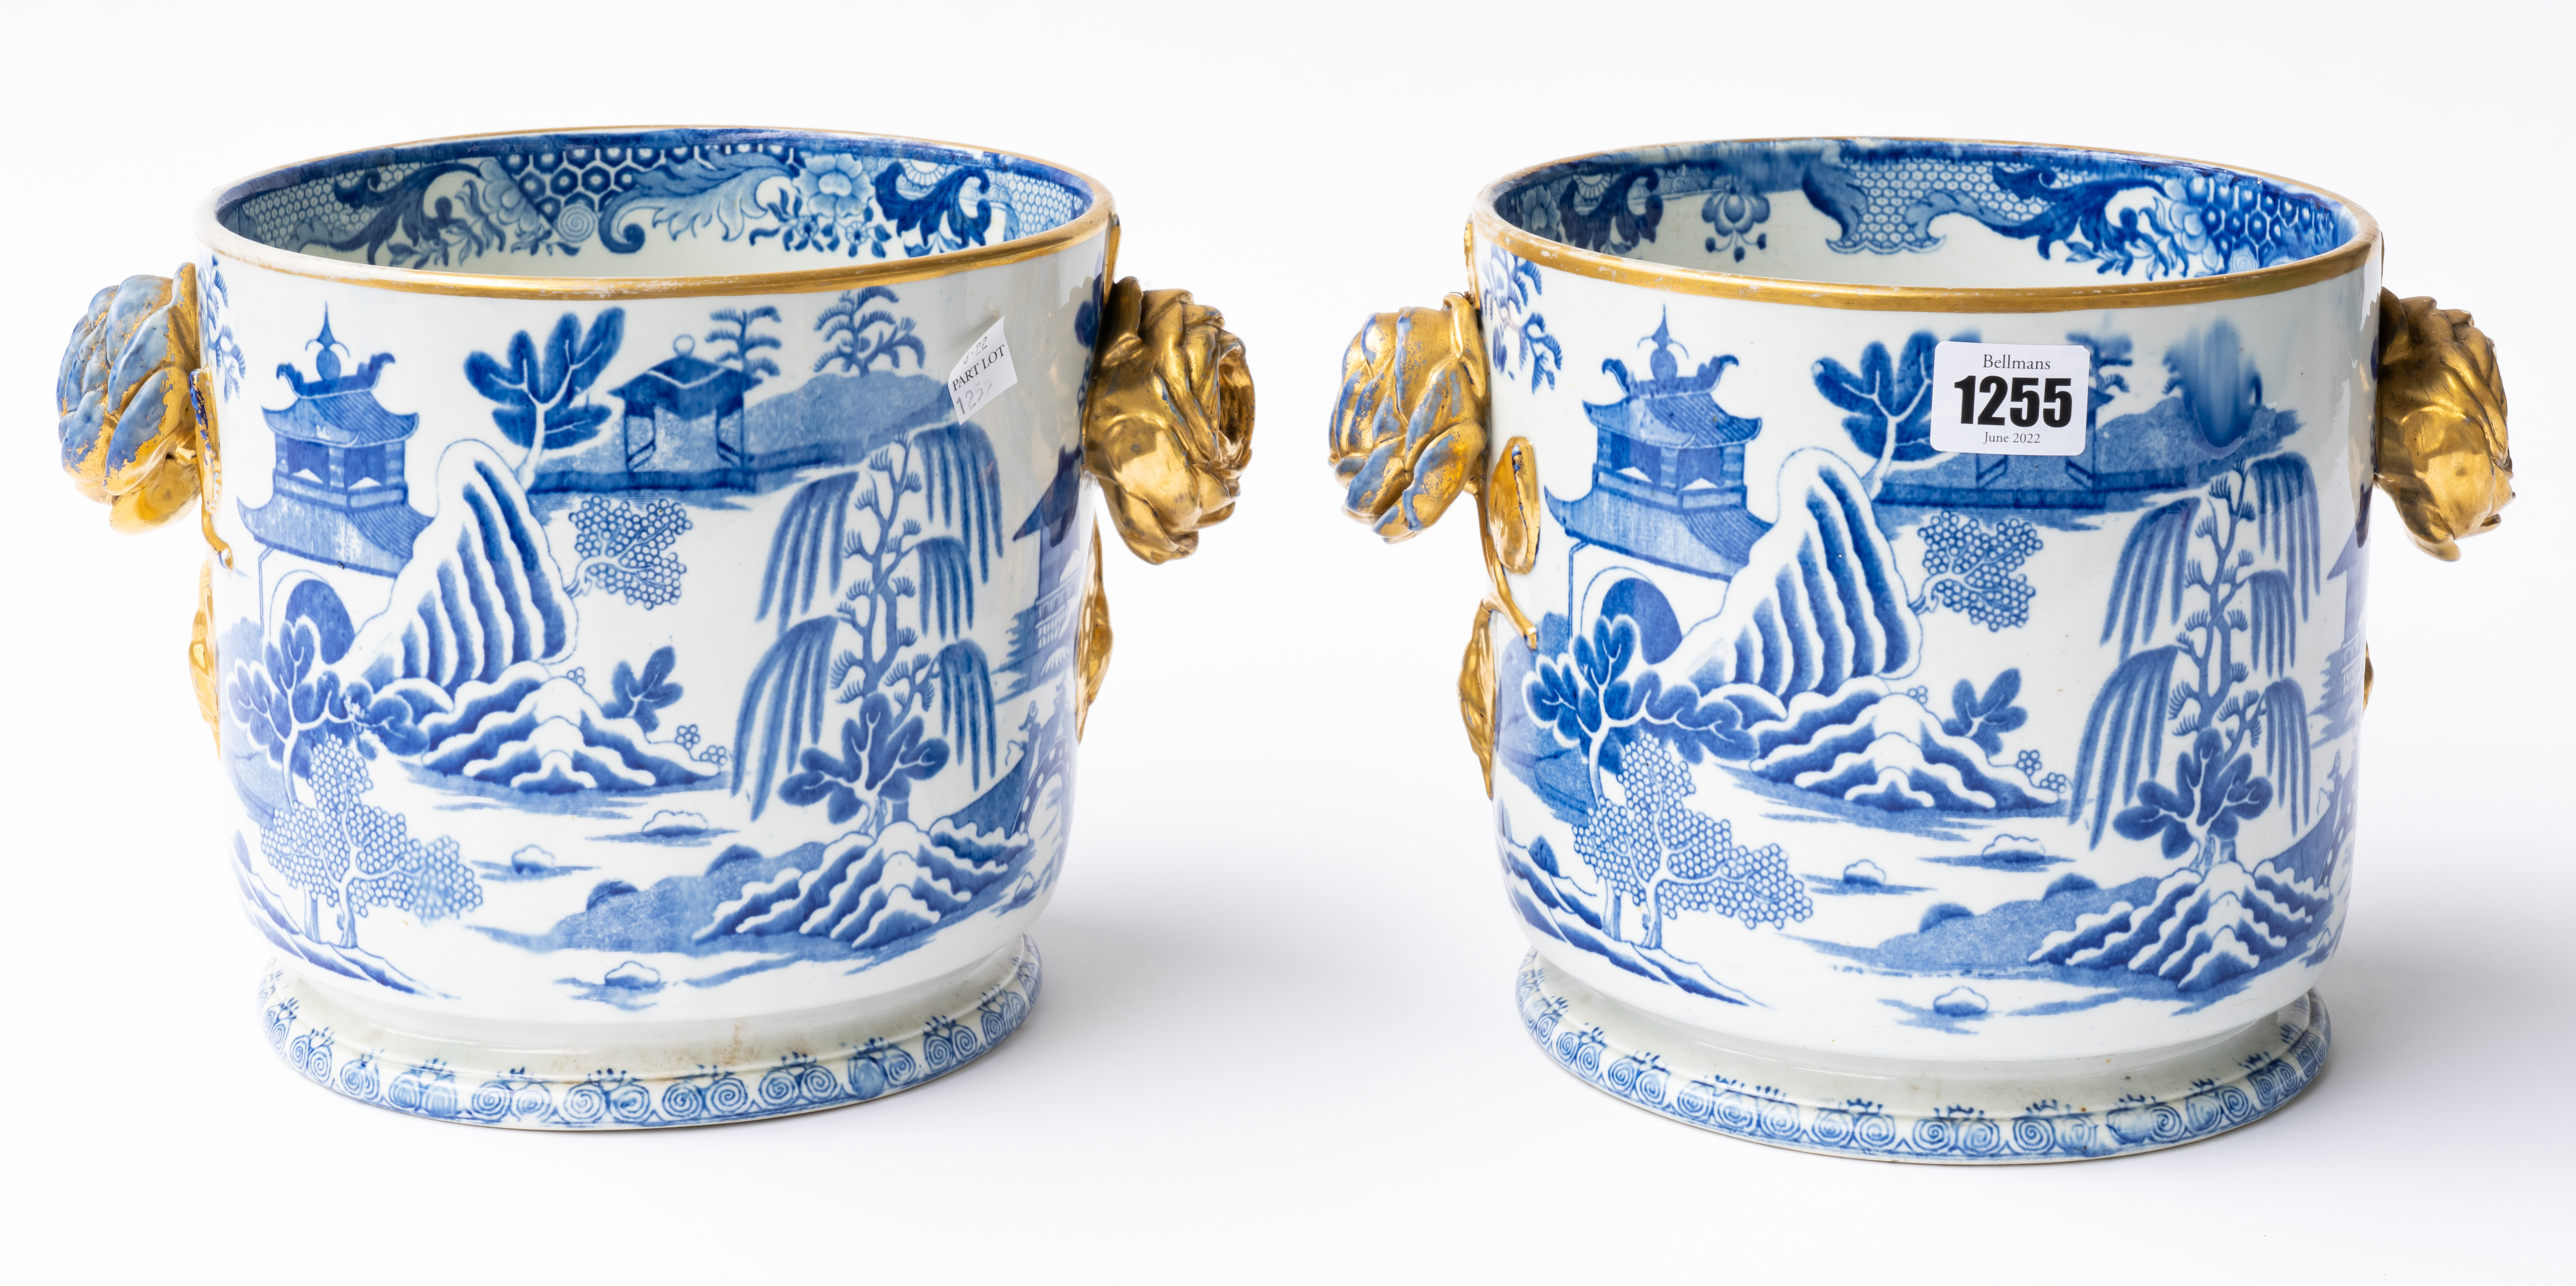 AN UNUSUAL PAIR OF MASON'S IRONSTONE WINE COOLERS OR JARDINIERES (2) - Image 3 of 6